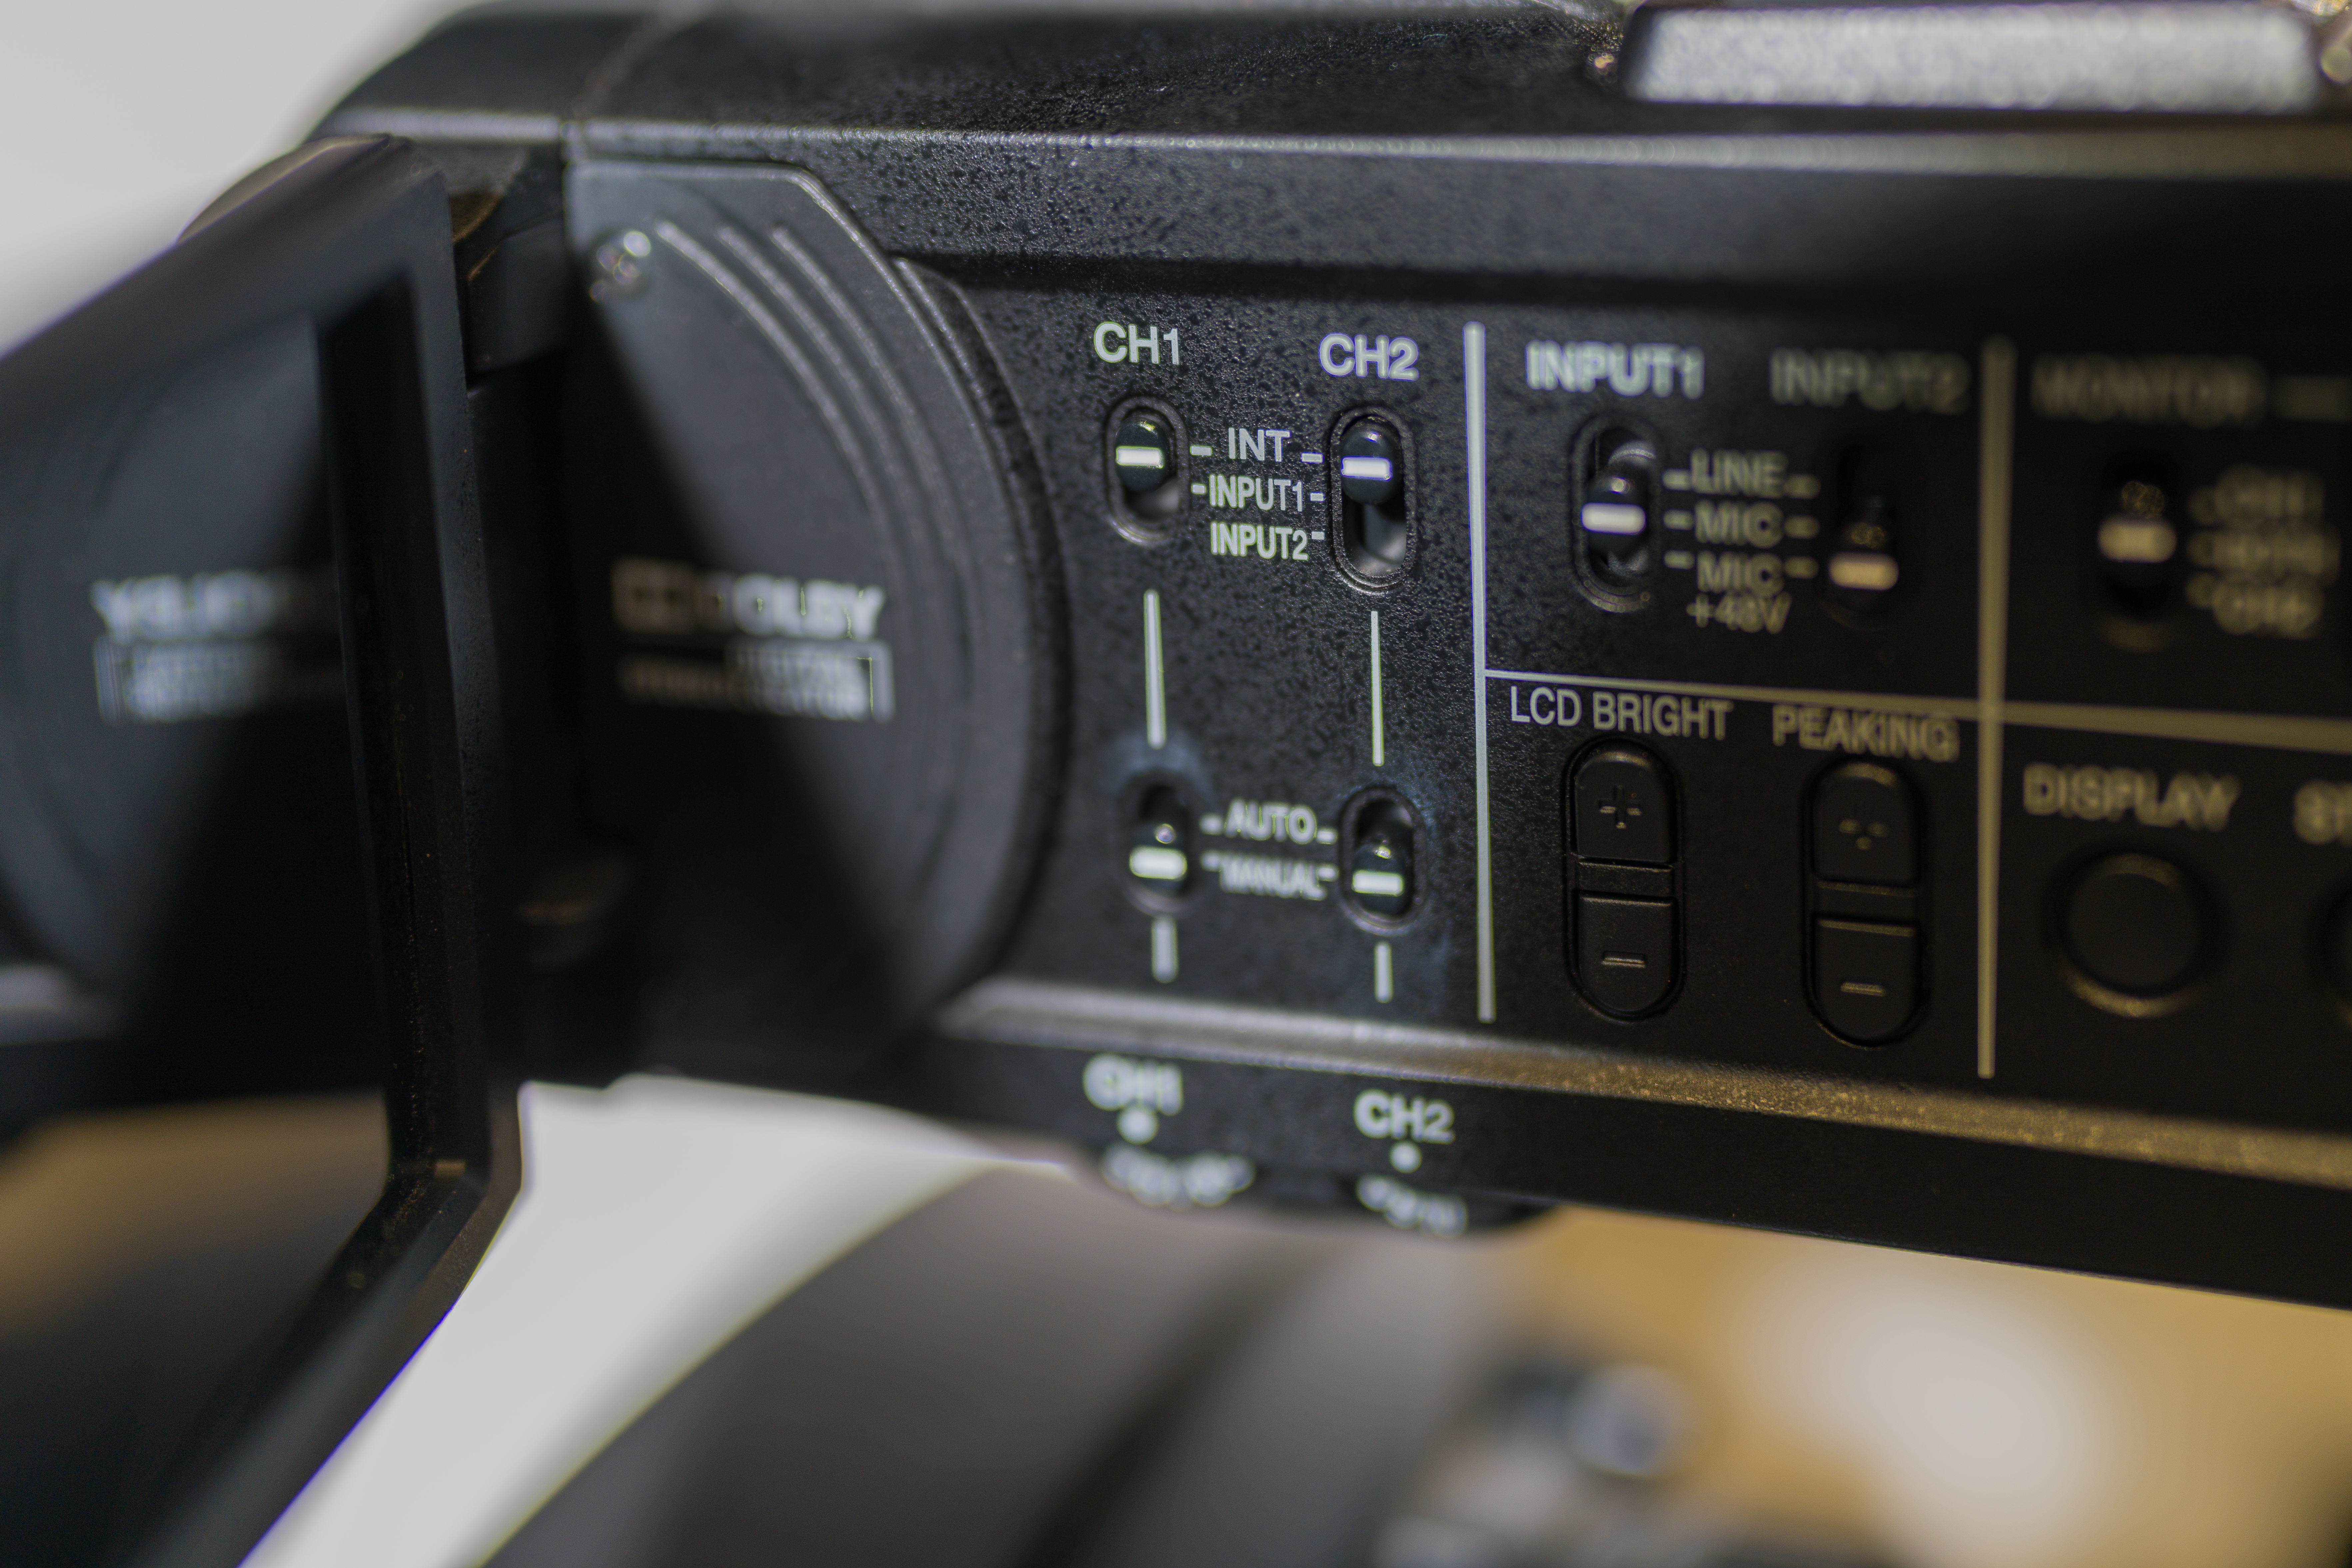 Side view of video camera with Channel controls that can be set to INT, Input 1, or Input 2.